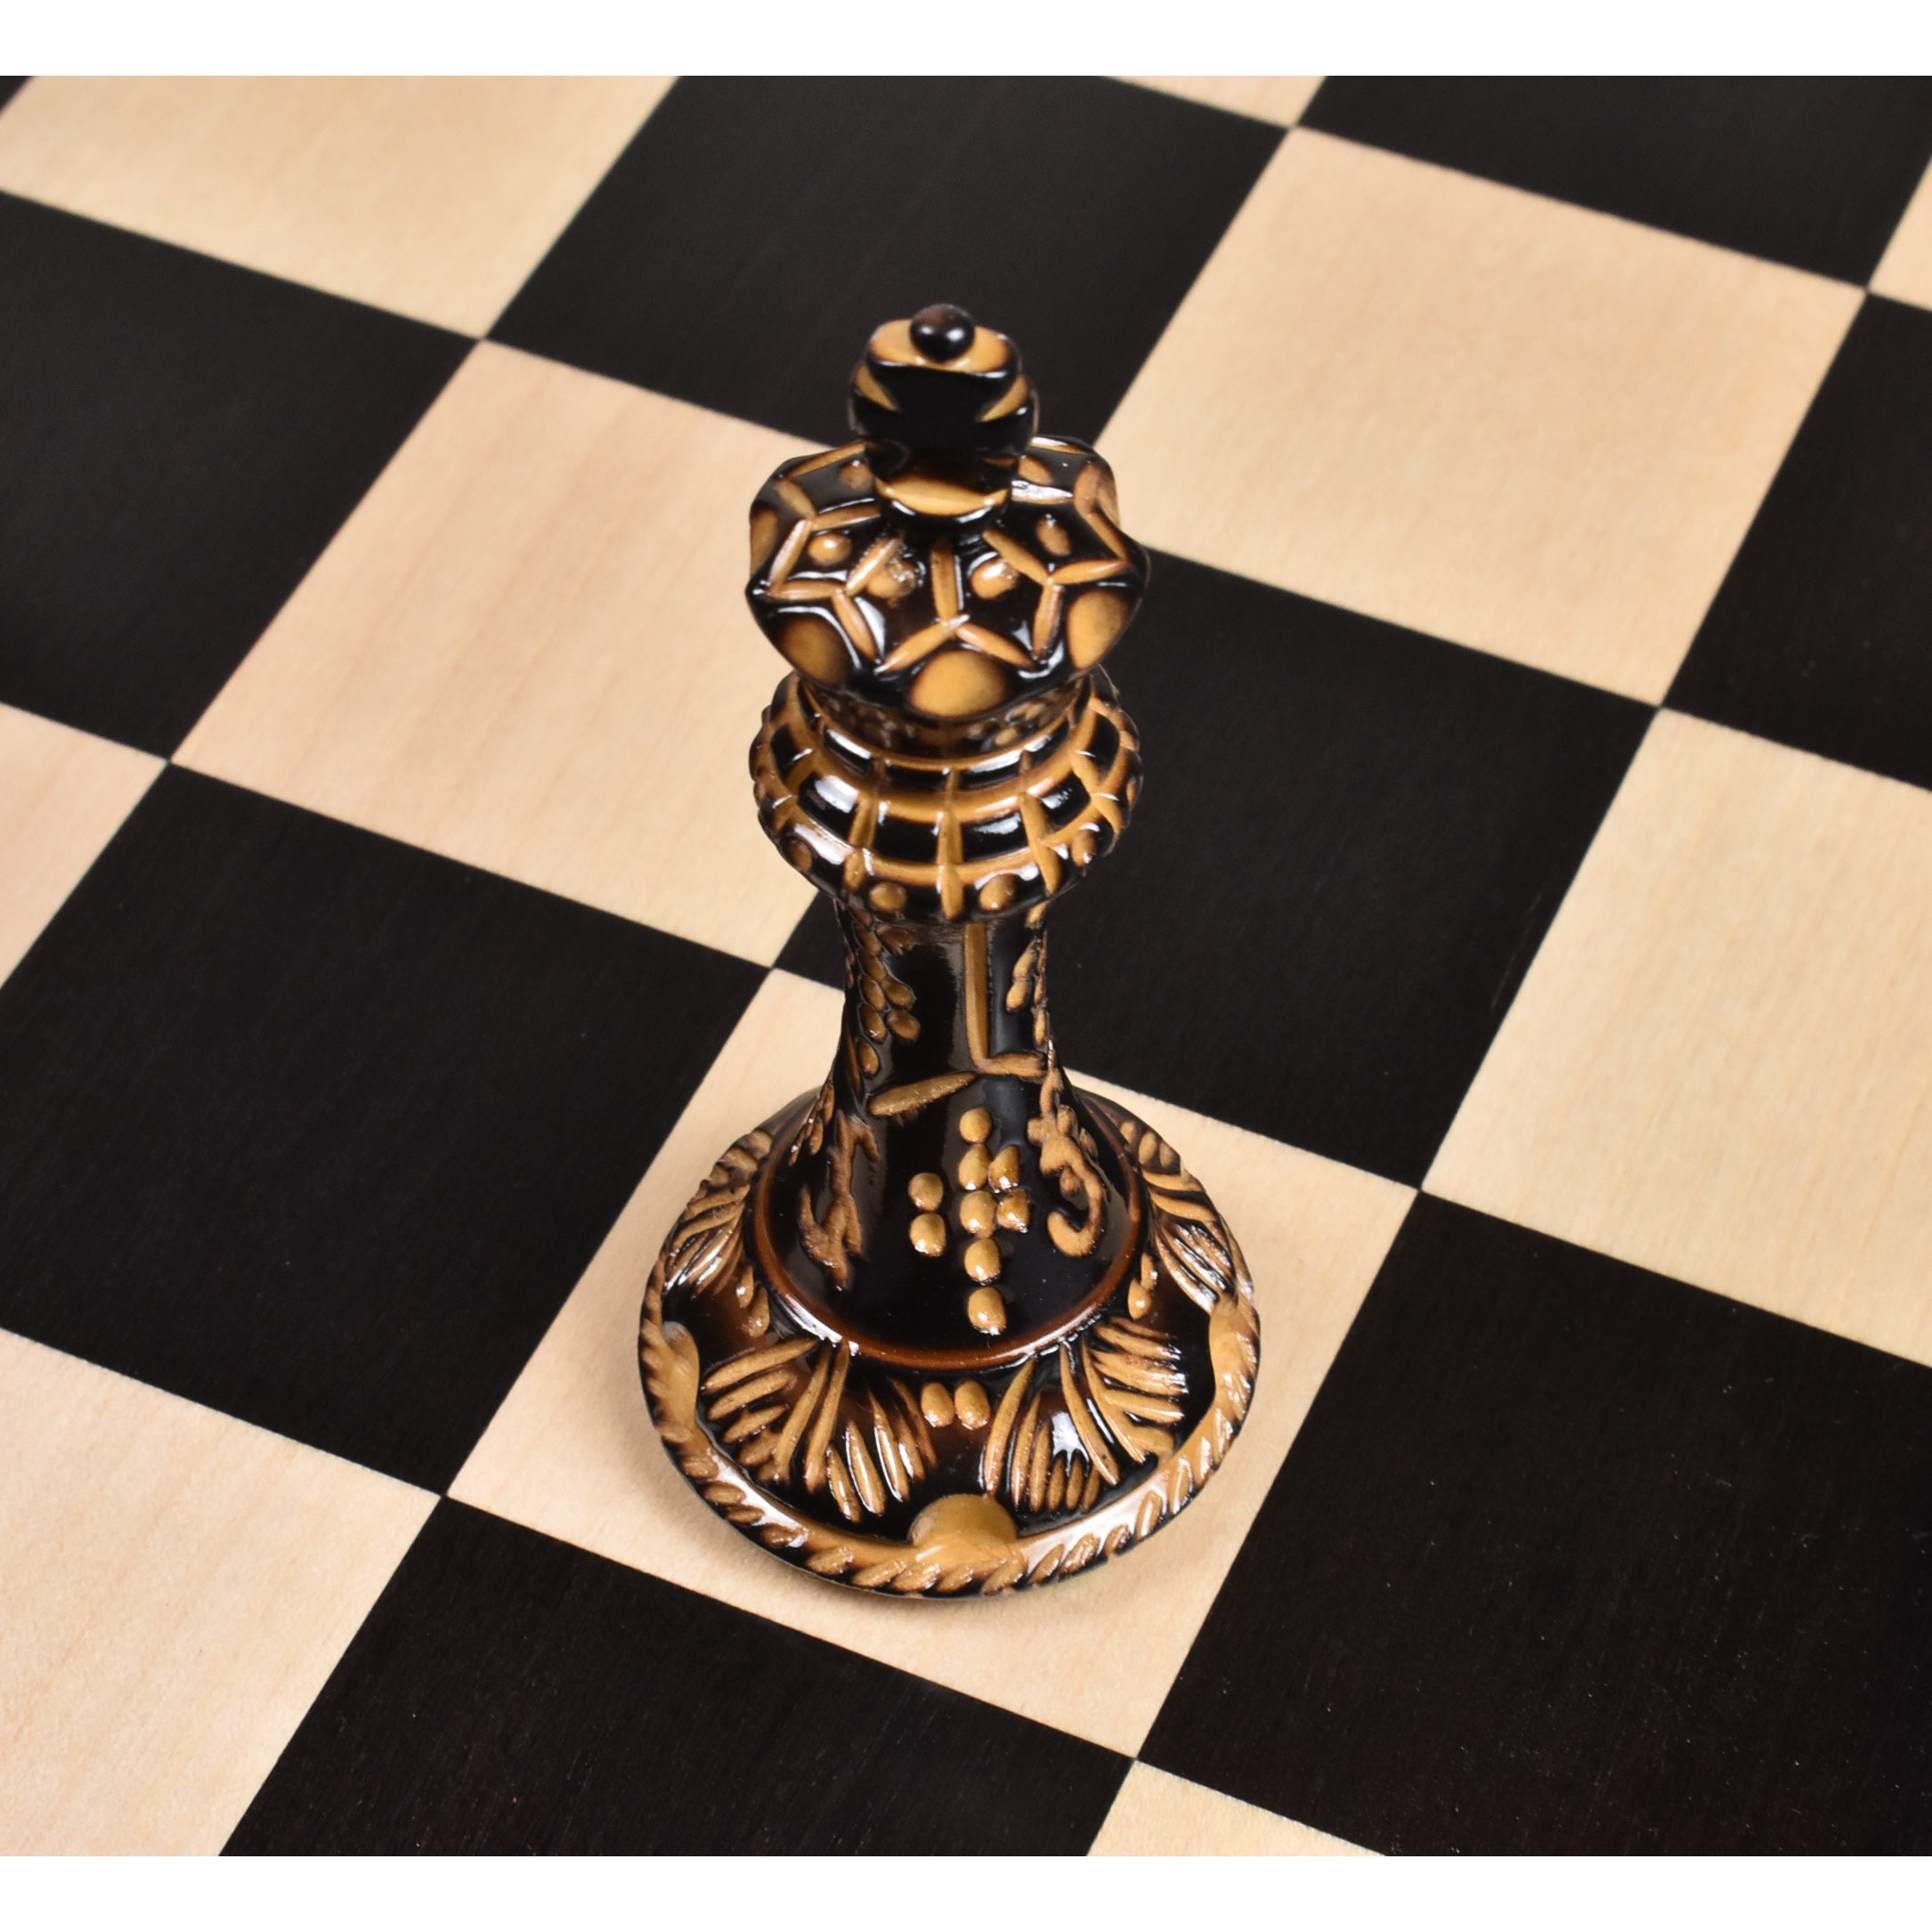 4.2 Rare American Staunton Luxury Chess Set- Chess Pieces Only